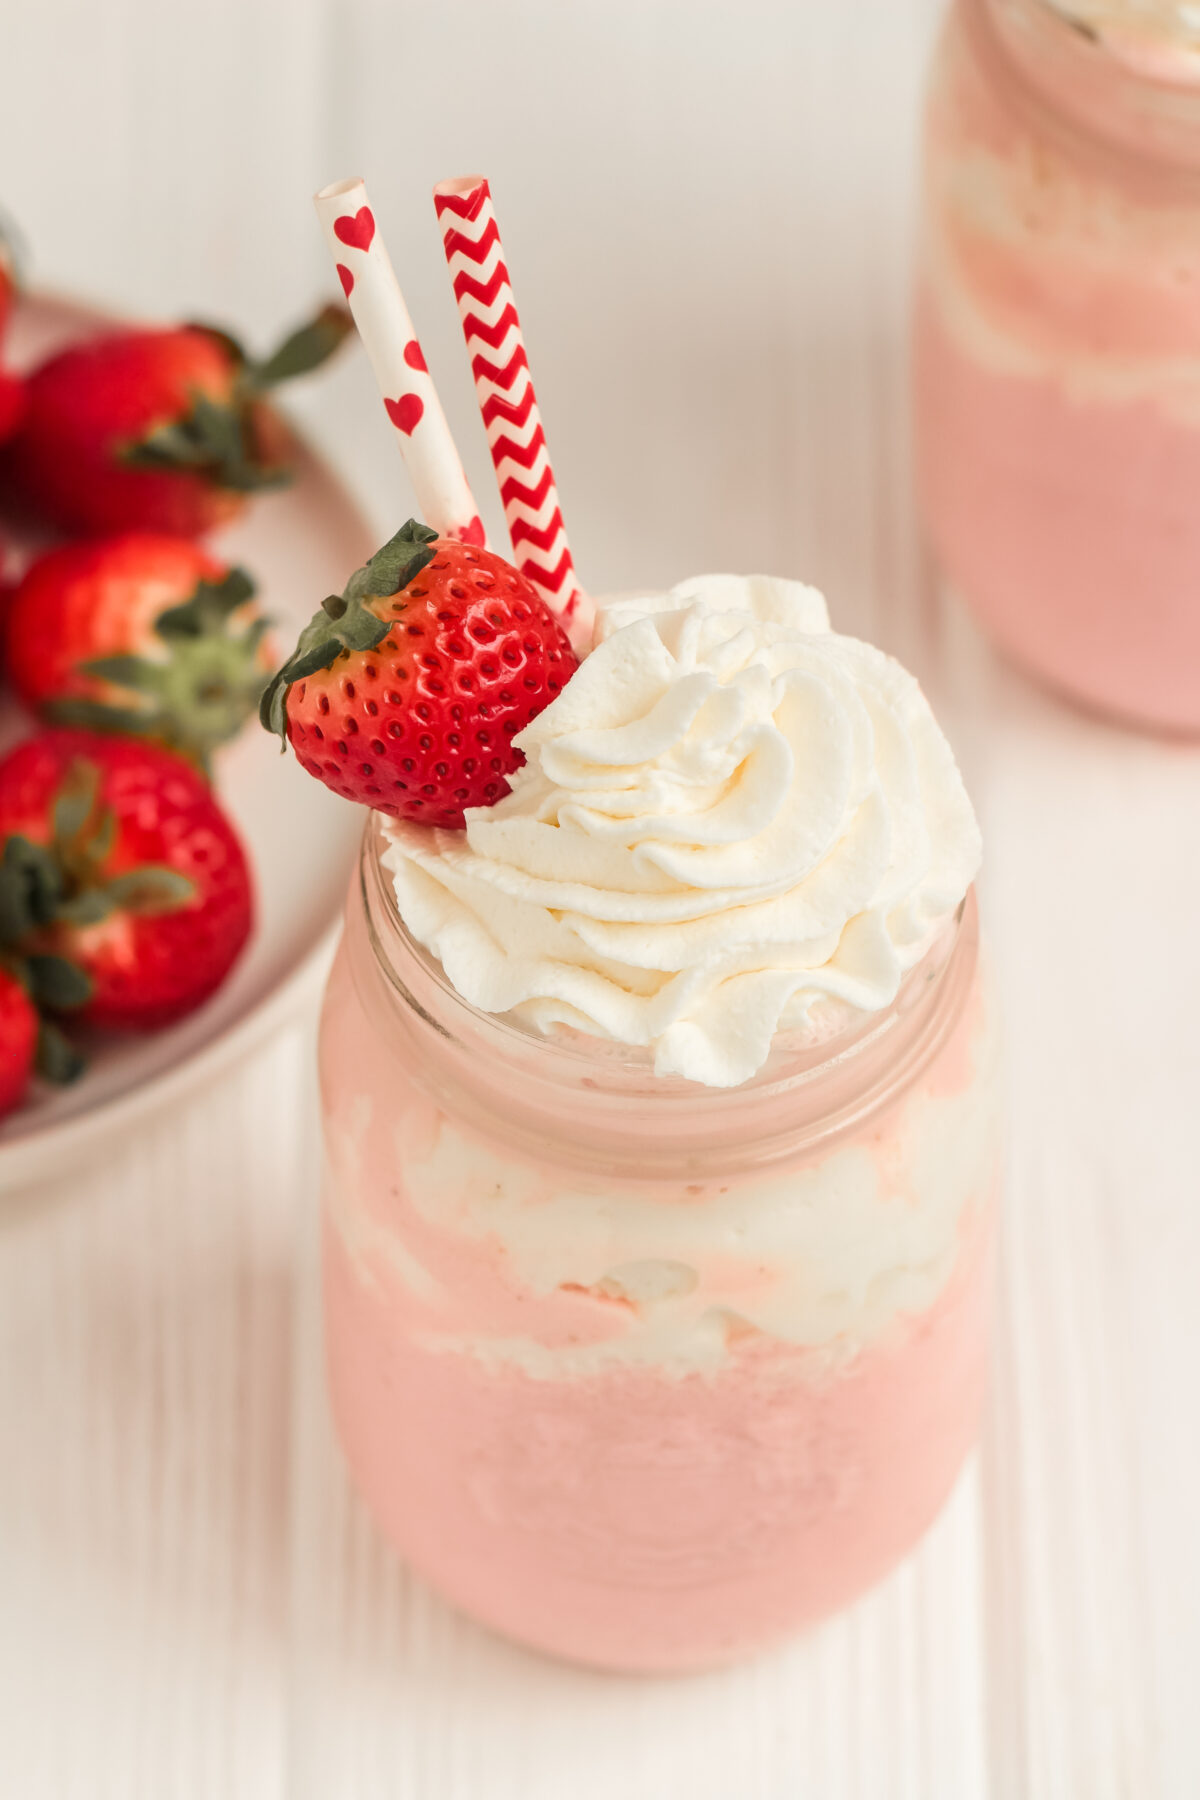 The best recipe for a cool and creamy fresh strawberry milkshake. With this recipe, you will be able to make the perfect shake every time!